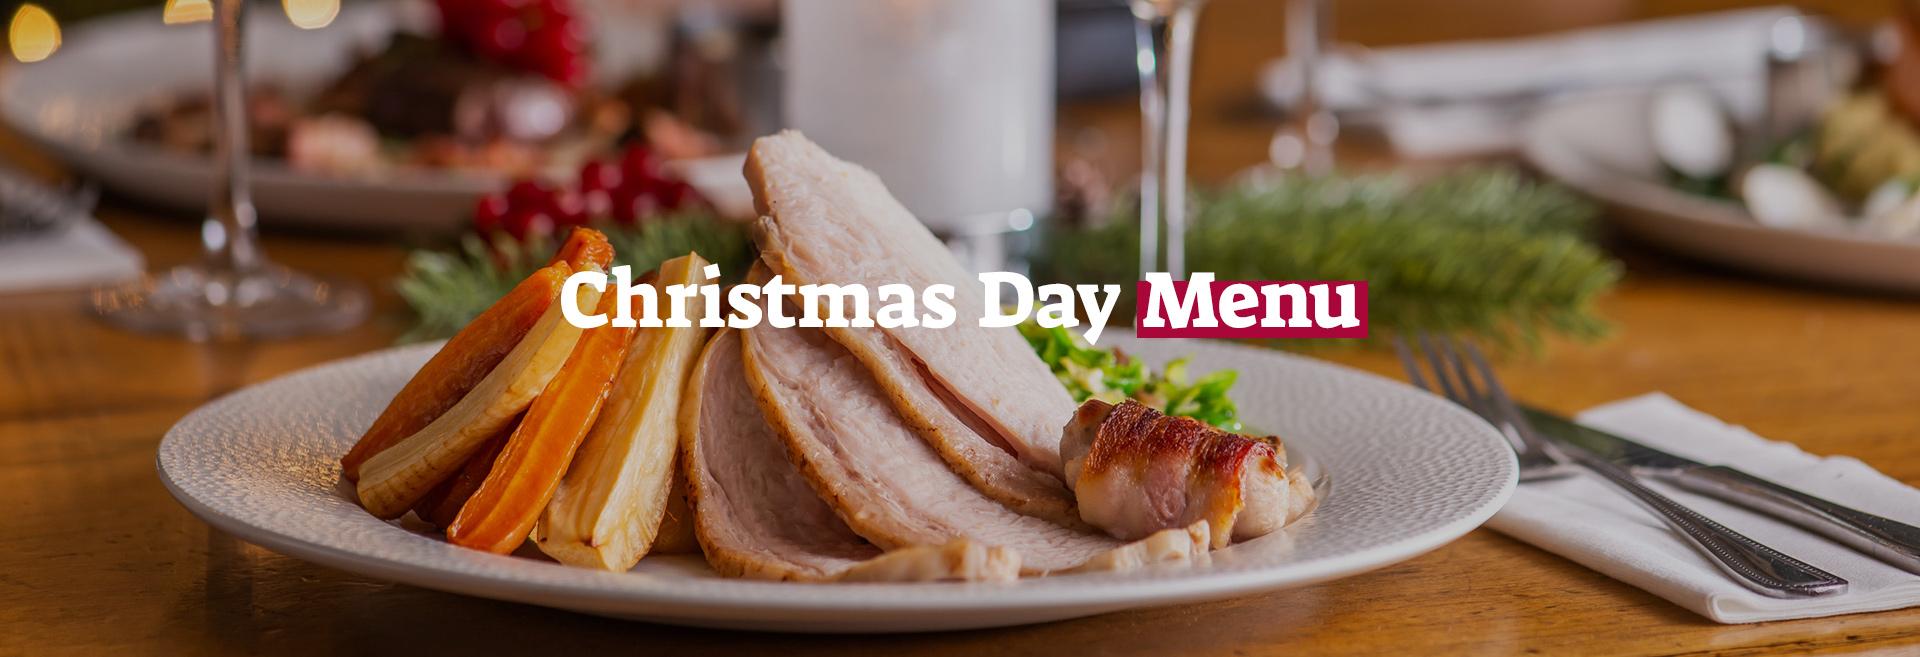 Christmas Day Menu at The Flyer